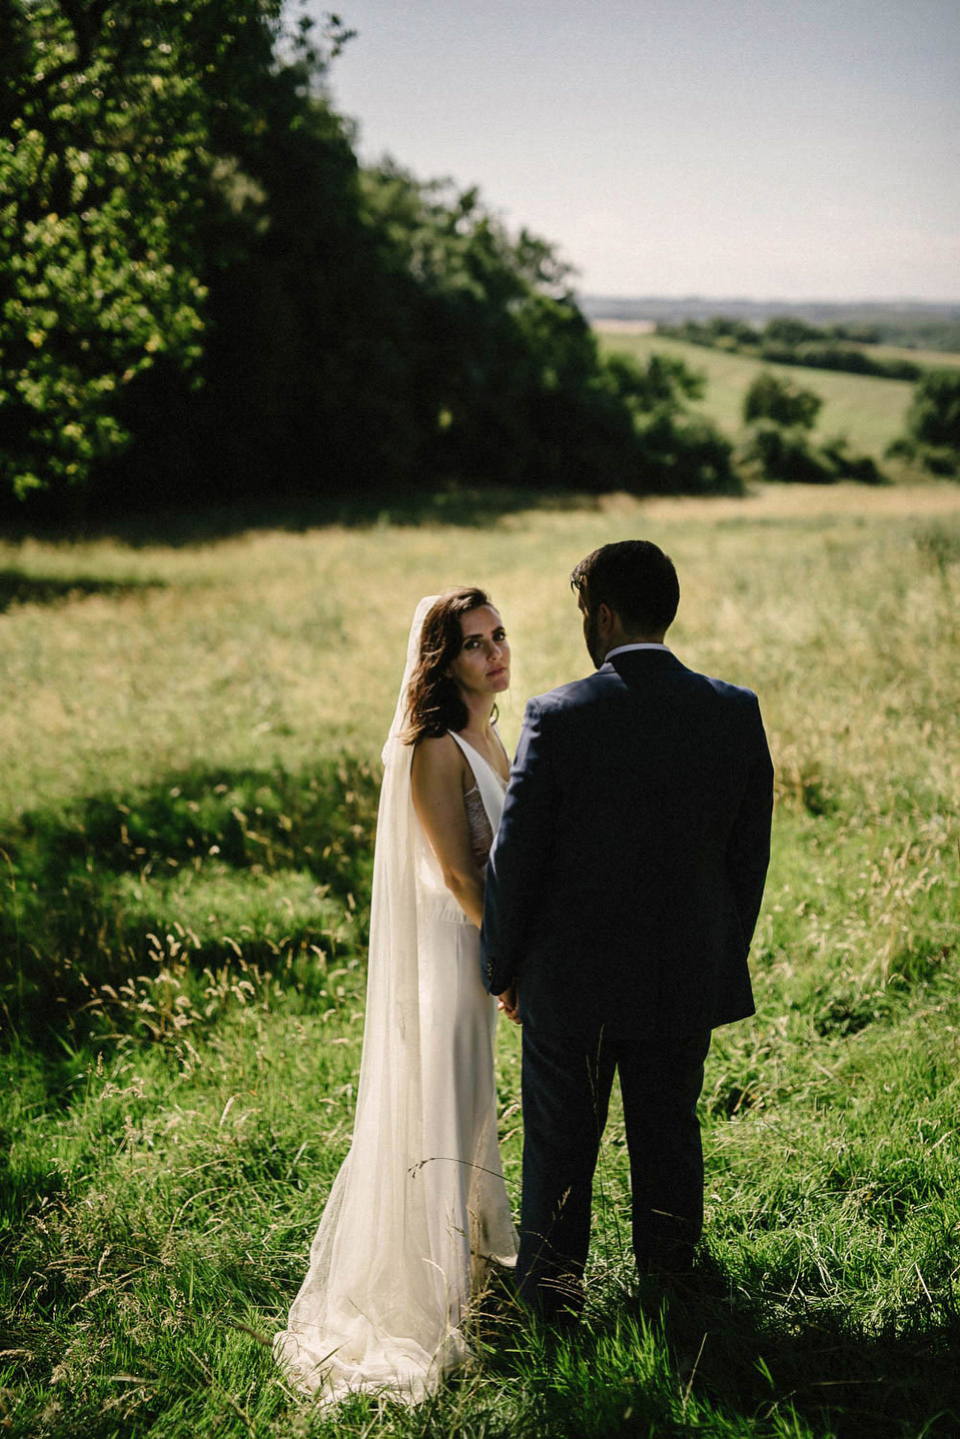 Deirdre wore a Rime Arodaky gown for her laid back, relaxed and rustic wedding in France. Images by This Modern Love Photography and Tomasz Wagner.